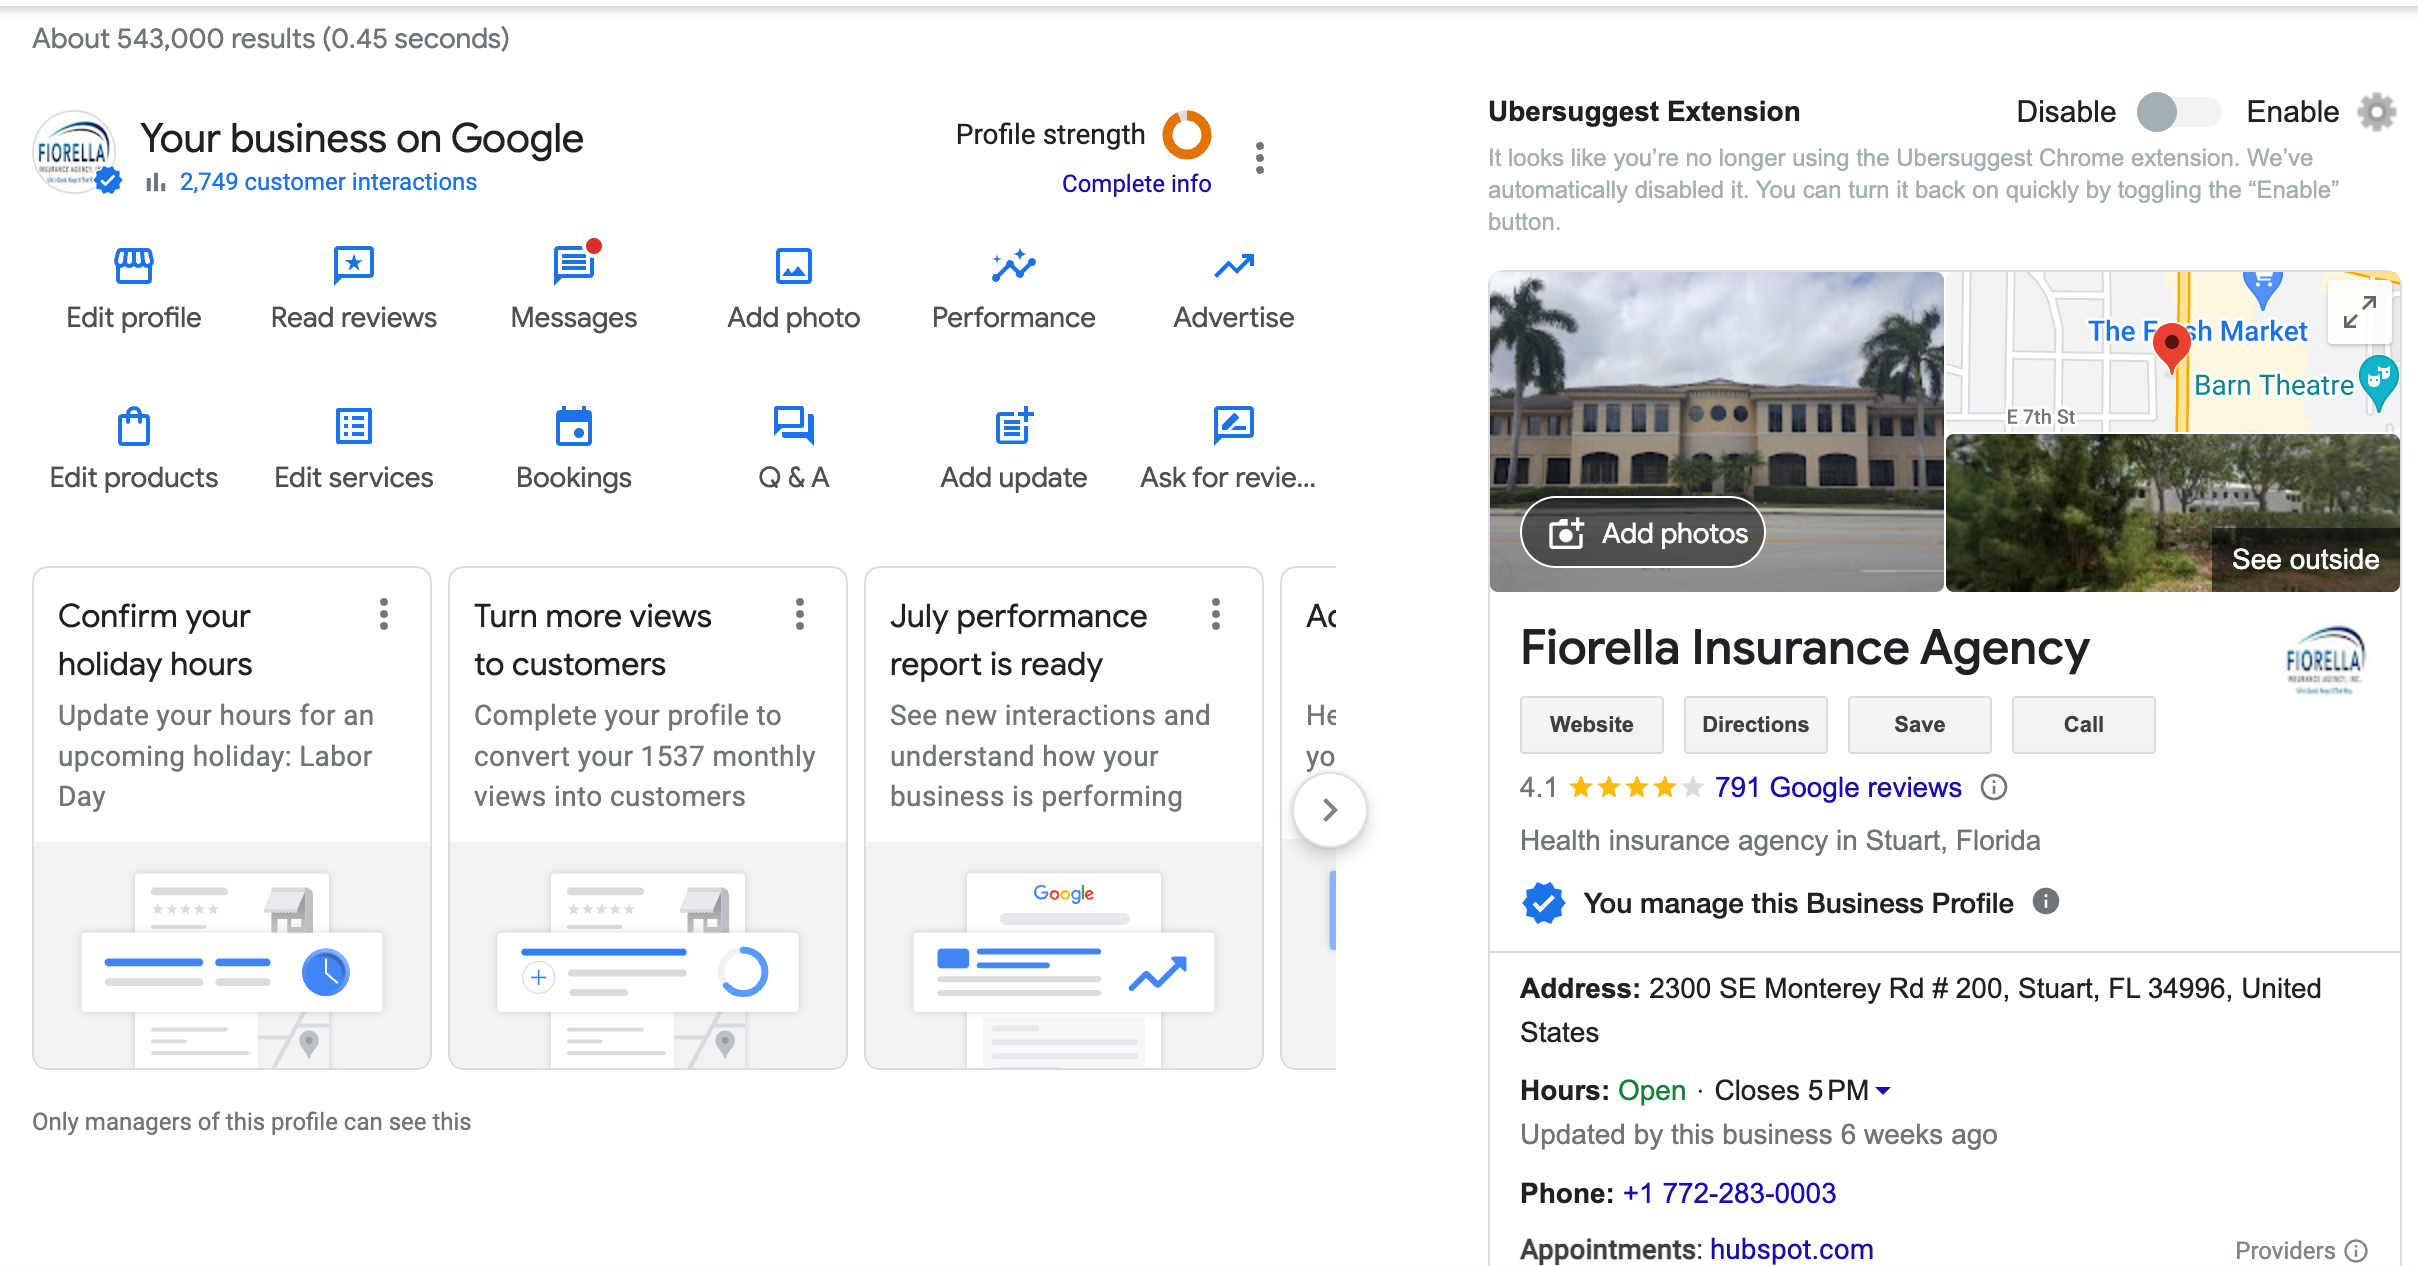 Example Local Business Profile Displayed by Google